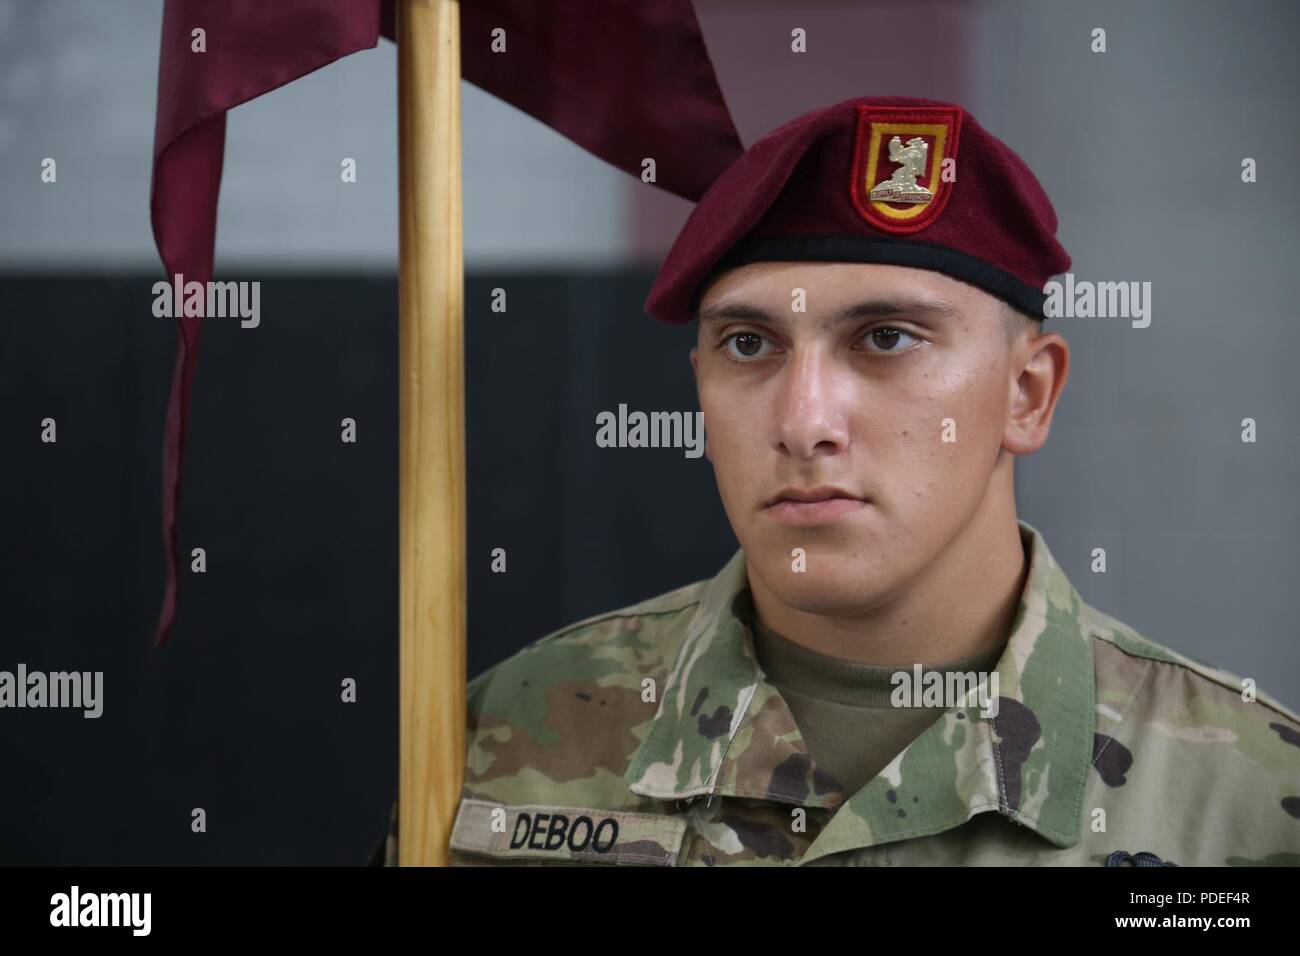 A U.S. Army paratrooper assined to 407th Brigade Support Battalion, 82nd Airborne Division awaits his inspection during the All American Week Guidon Competition on Fort Bragg, N.C., May 17, 2018. The guidon bearer serves as the rallying point and representation of each unit and its command element. Stock Photo